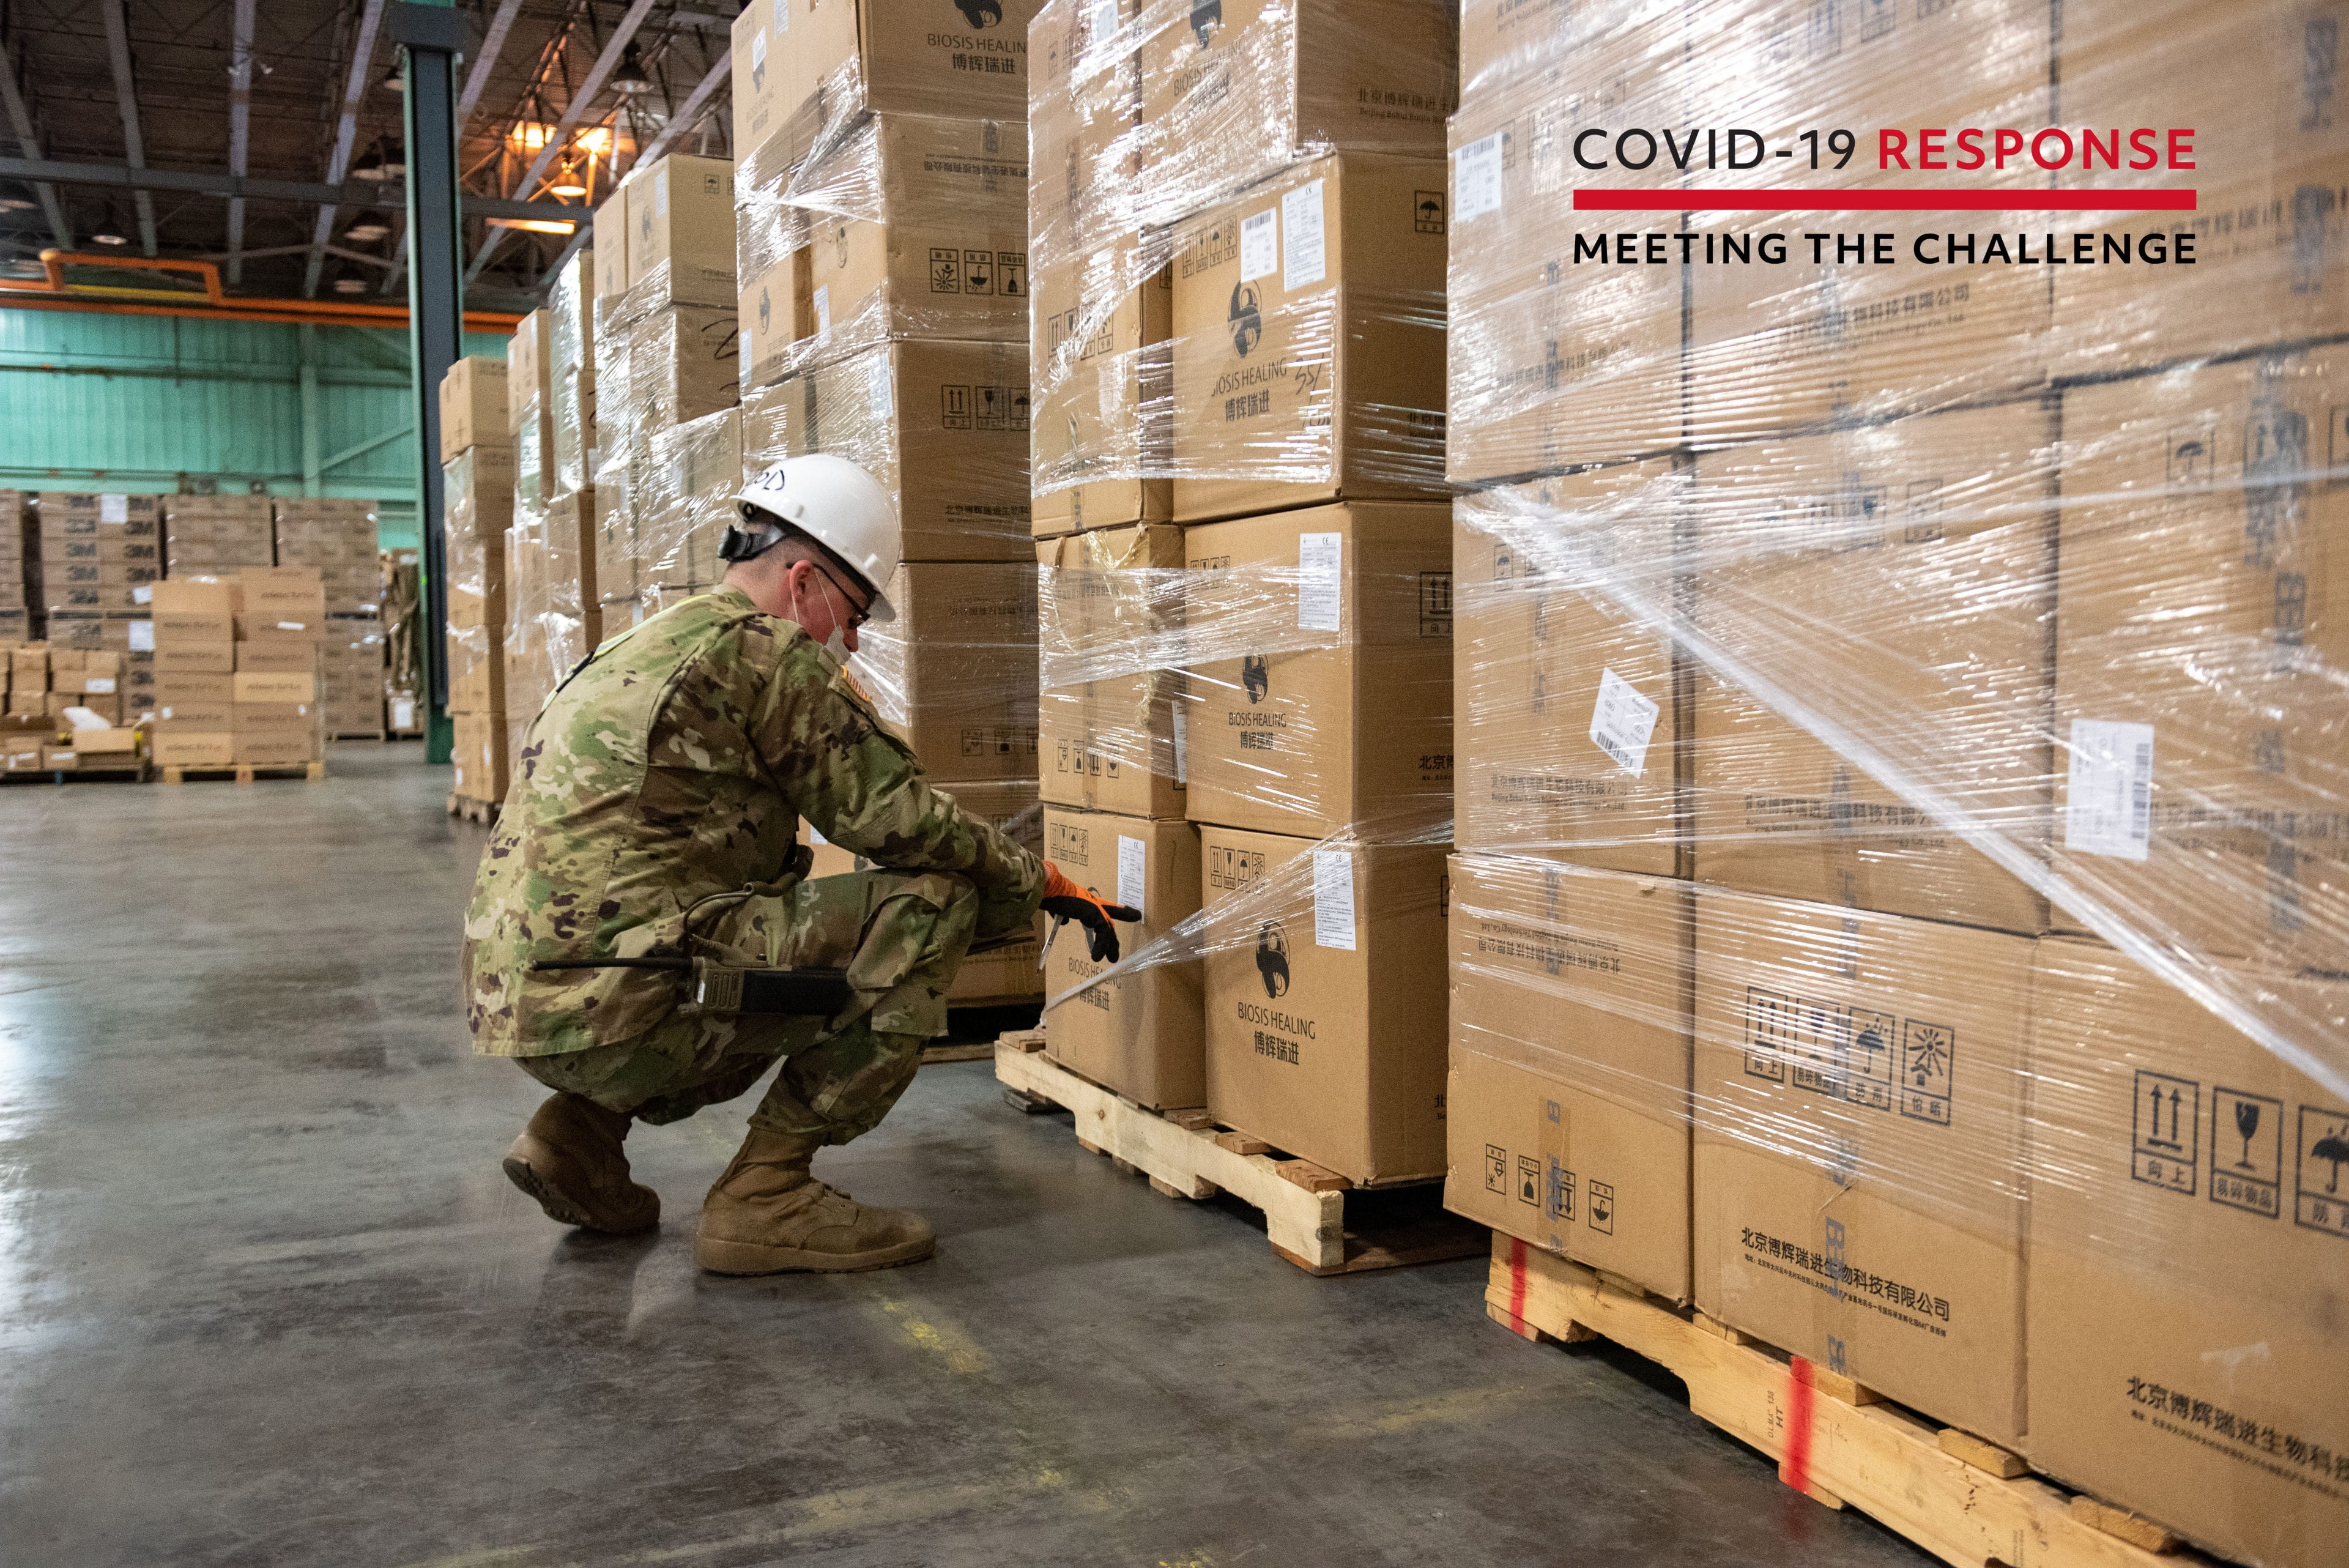 On April 26, Raytheon Technologies delivered hundreds of thousands of pieces of protective gear to Connecticut first responders, thanks to a $3 million donation from the company.